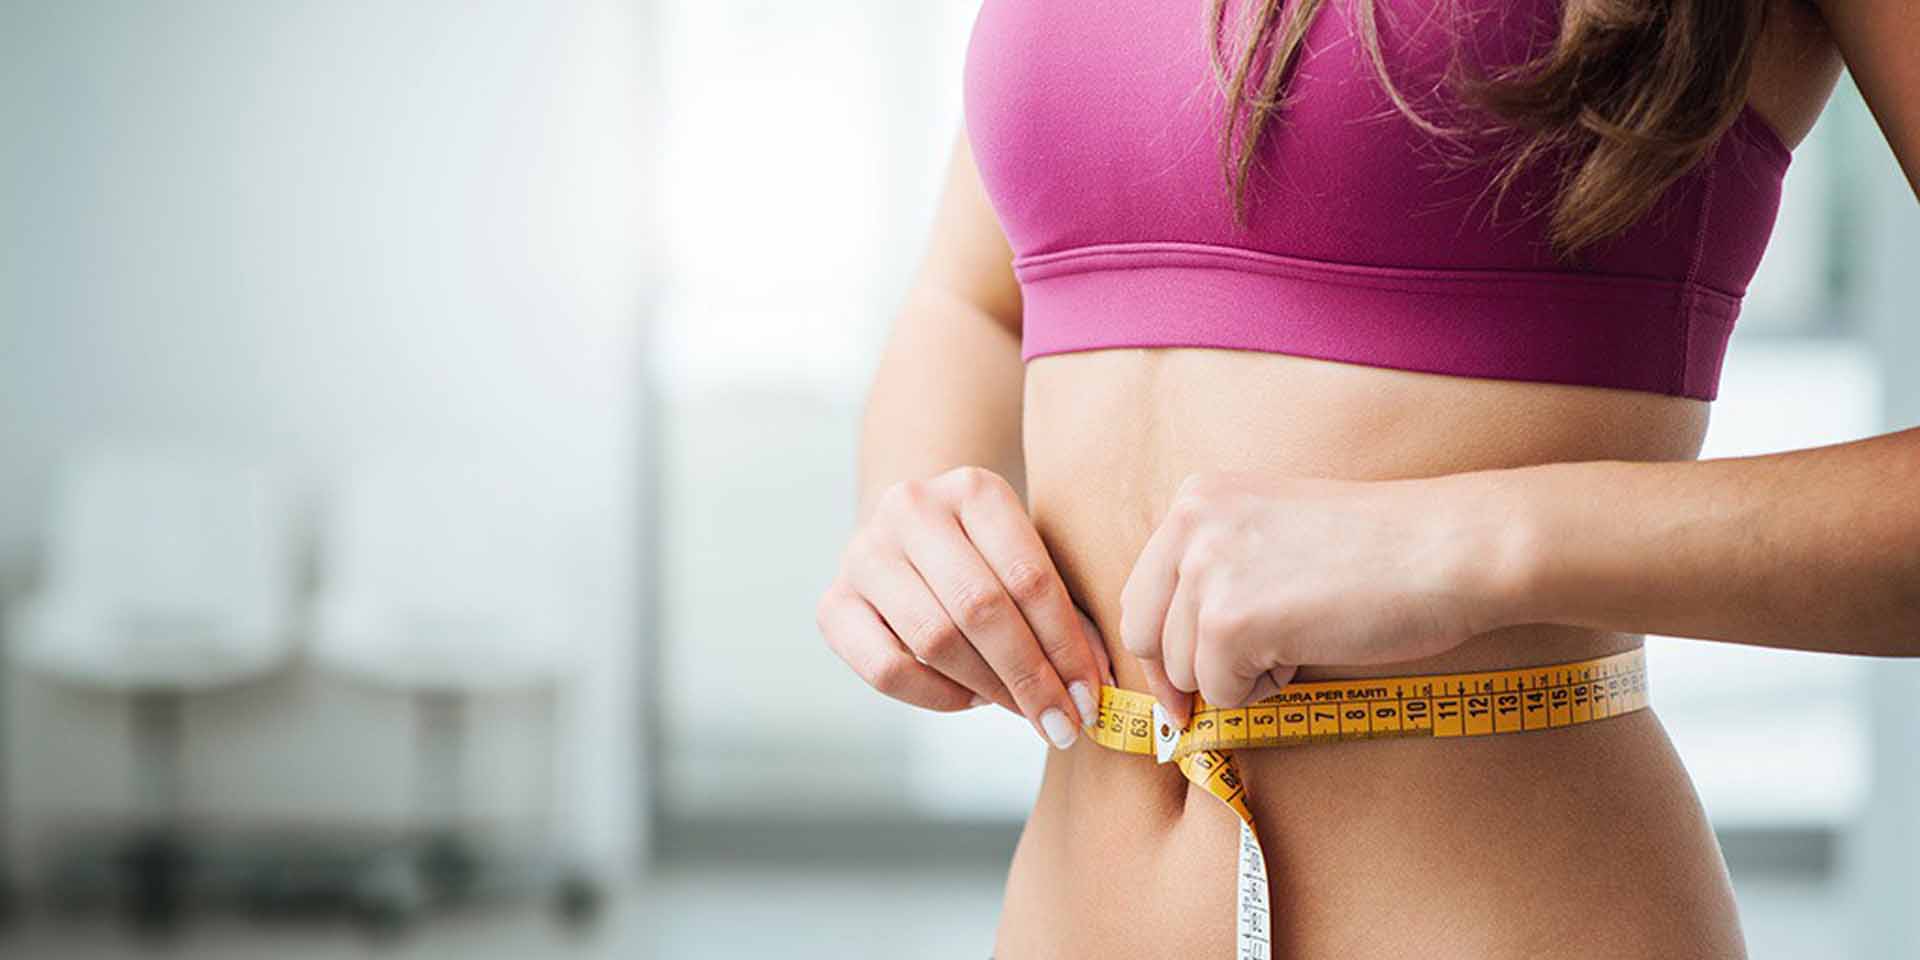 3 simple steps to lose weight without any surgery